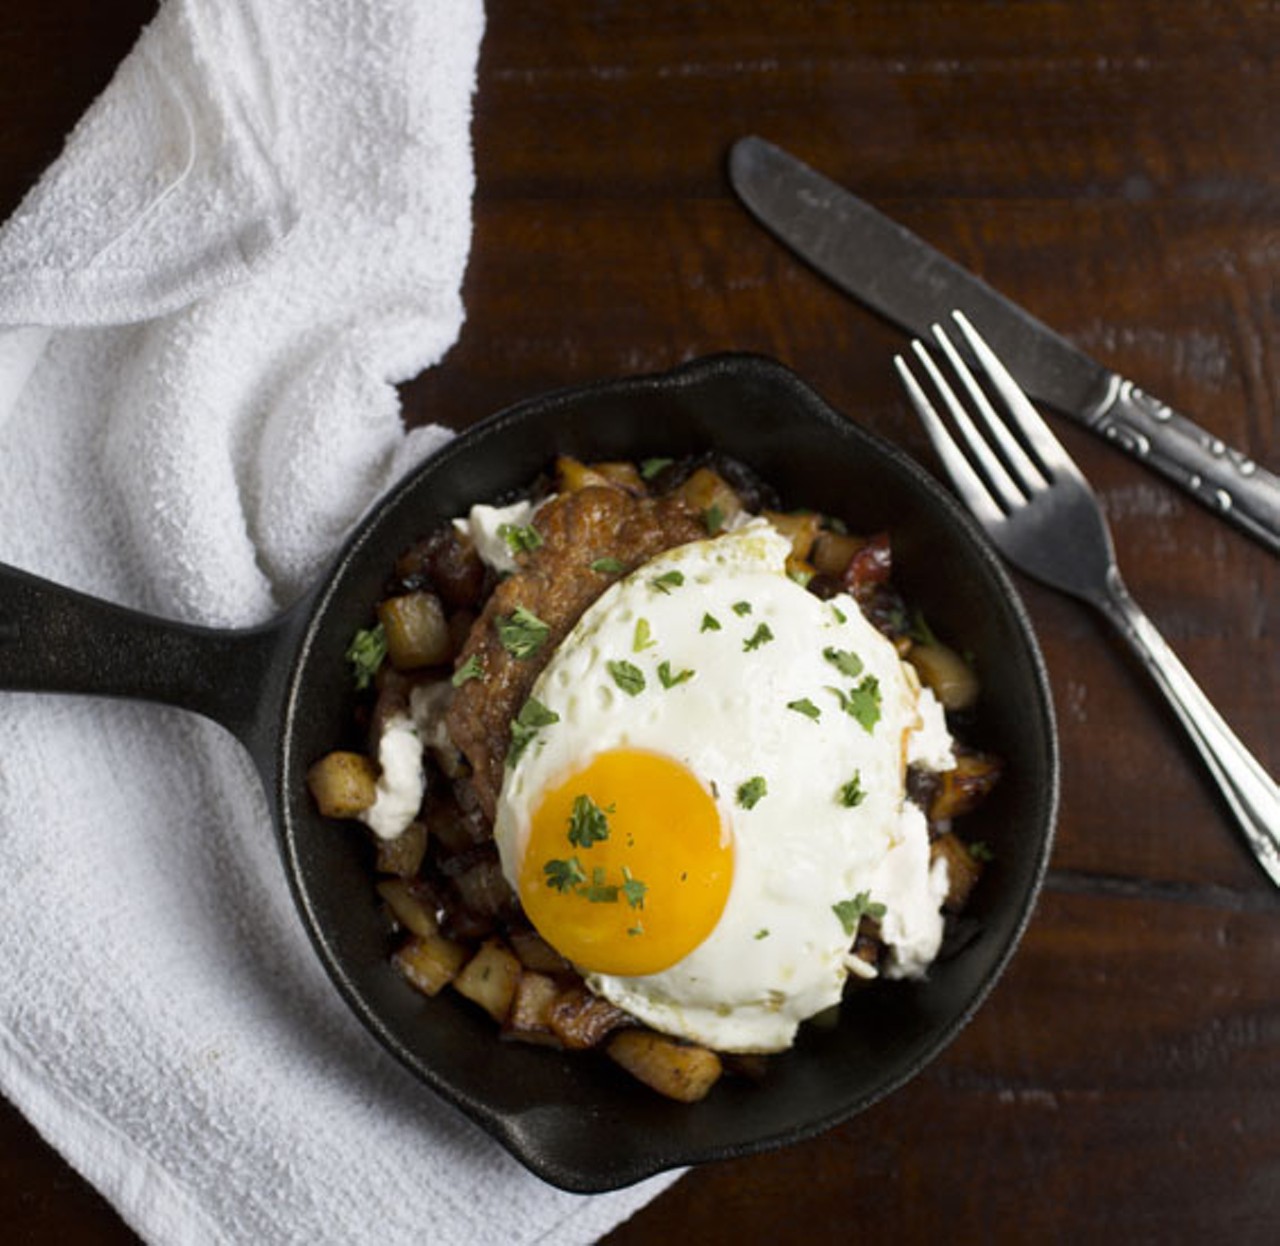 Look for this breakfast skillet when Bella Vino rolls out brunch service on Sunday, March 2.